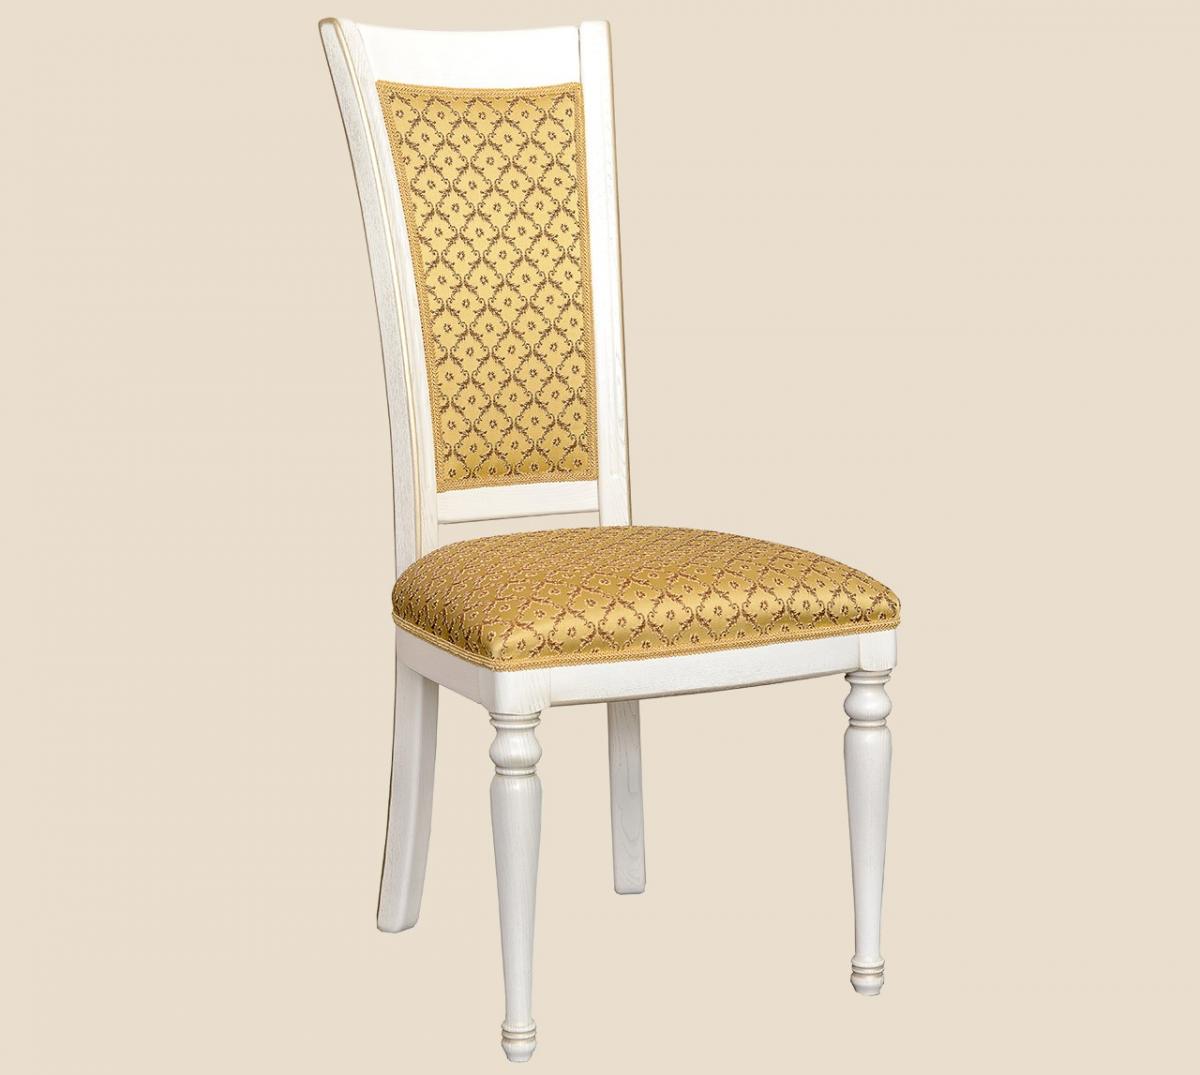 Chair "Classic" with a chiseled leg